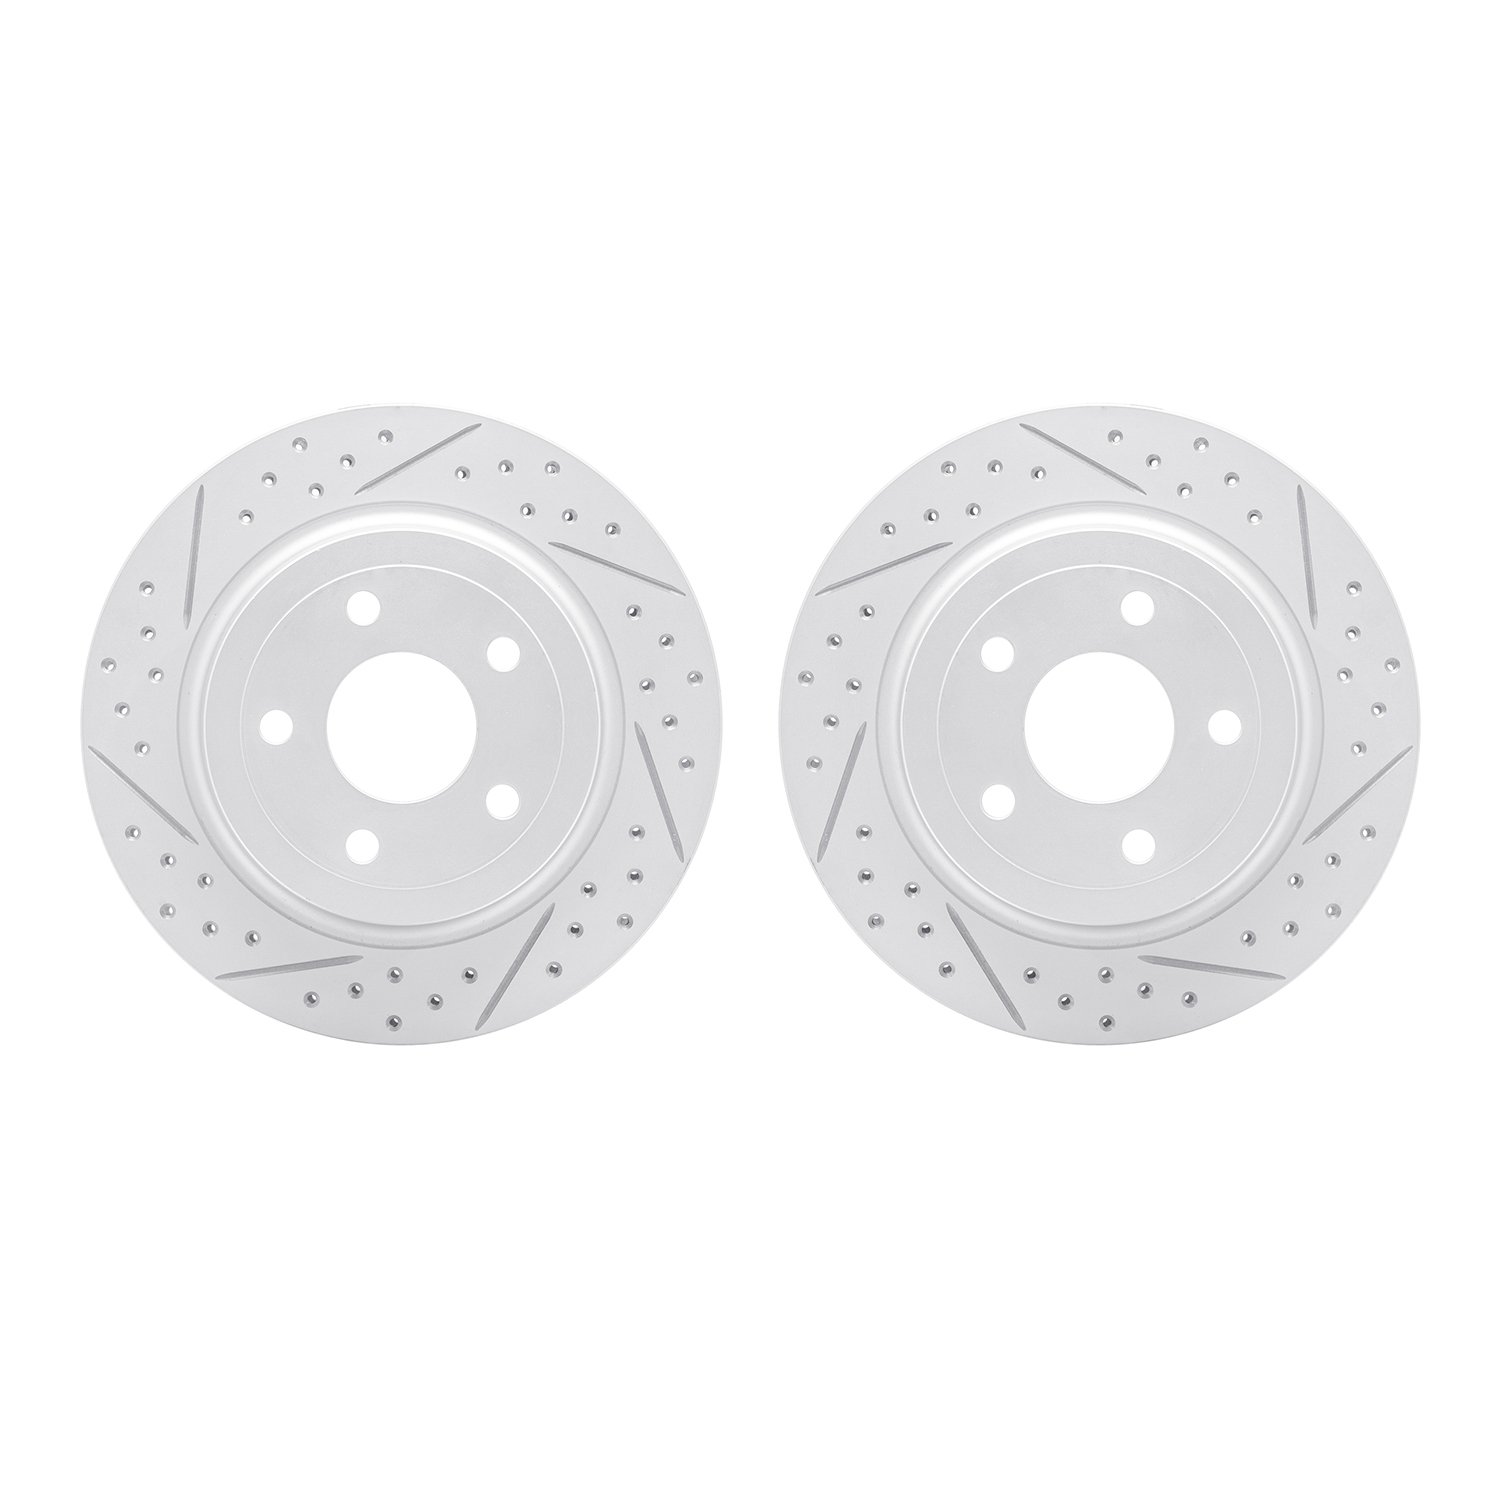 2002-47039 Geoperformance Drilled/Slotted Brake Rotors, 2008-2010 GM, Position: Rear